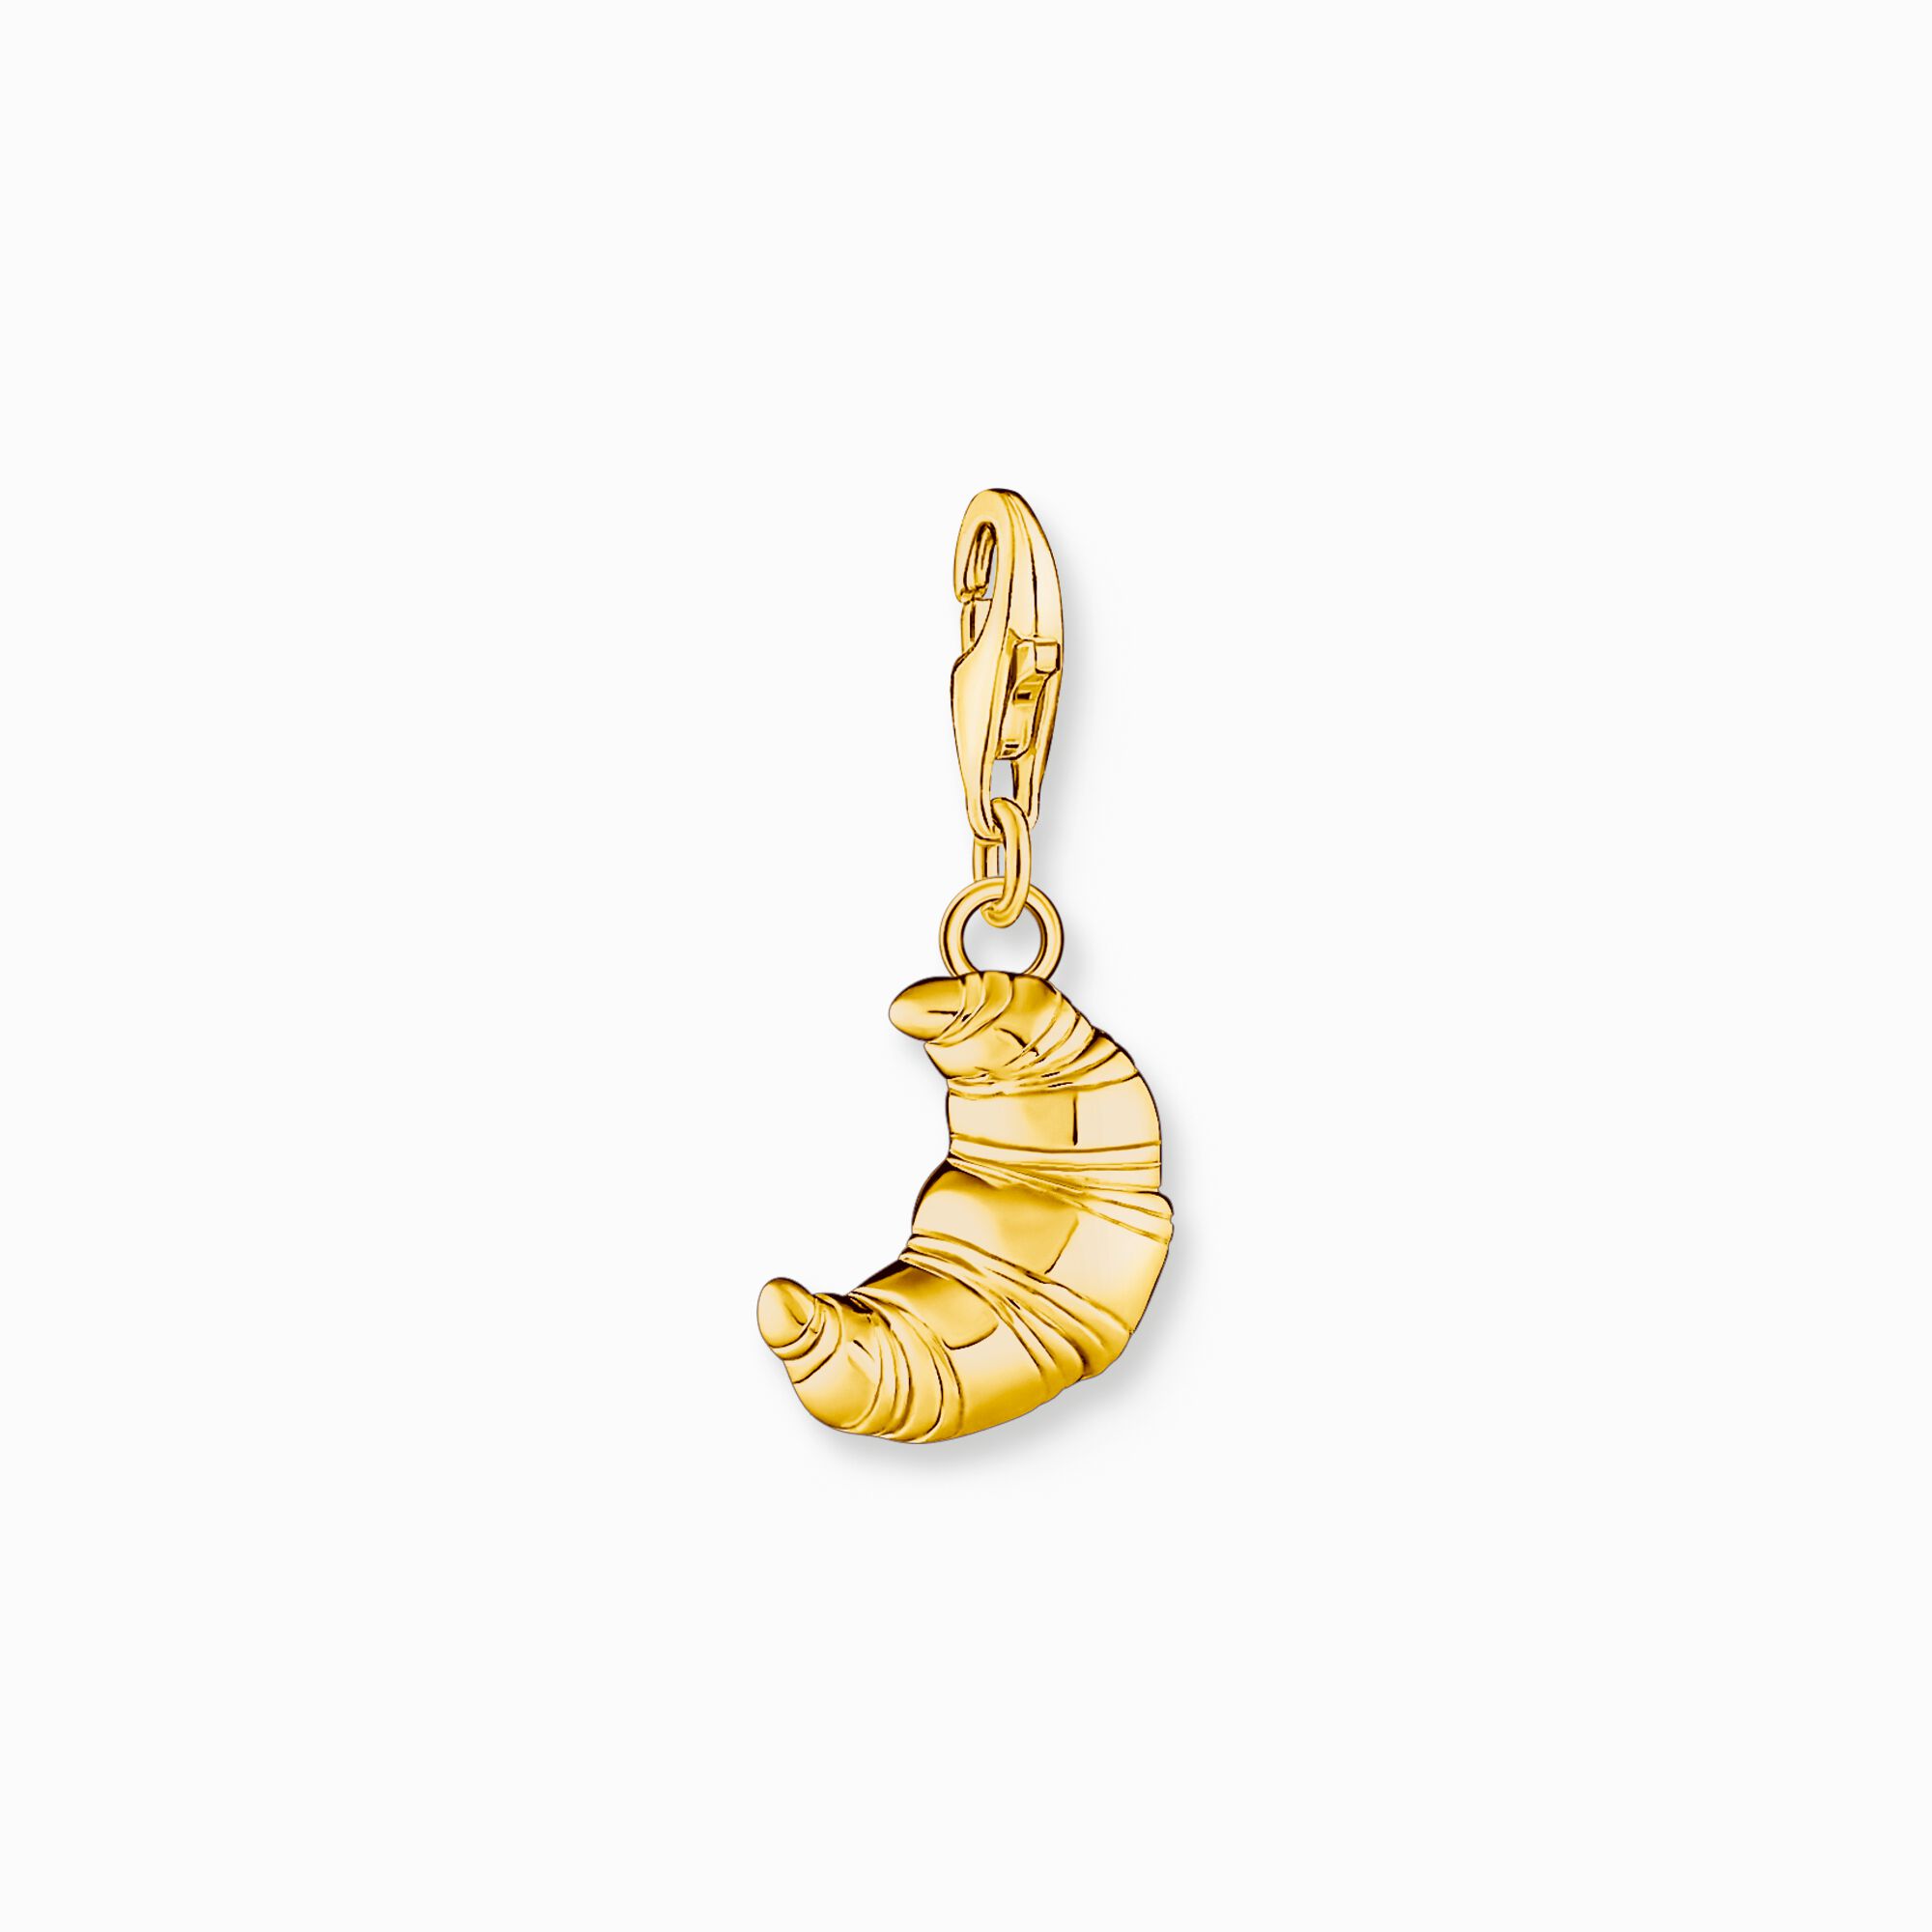 Gold-plated charm pendant in croissant design from the Charm Club collection in the THOMAS SABO online store